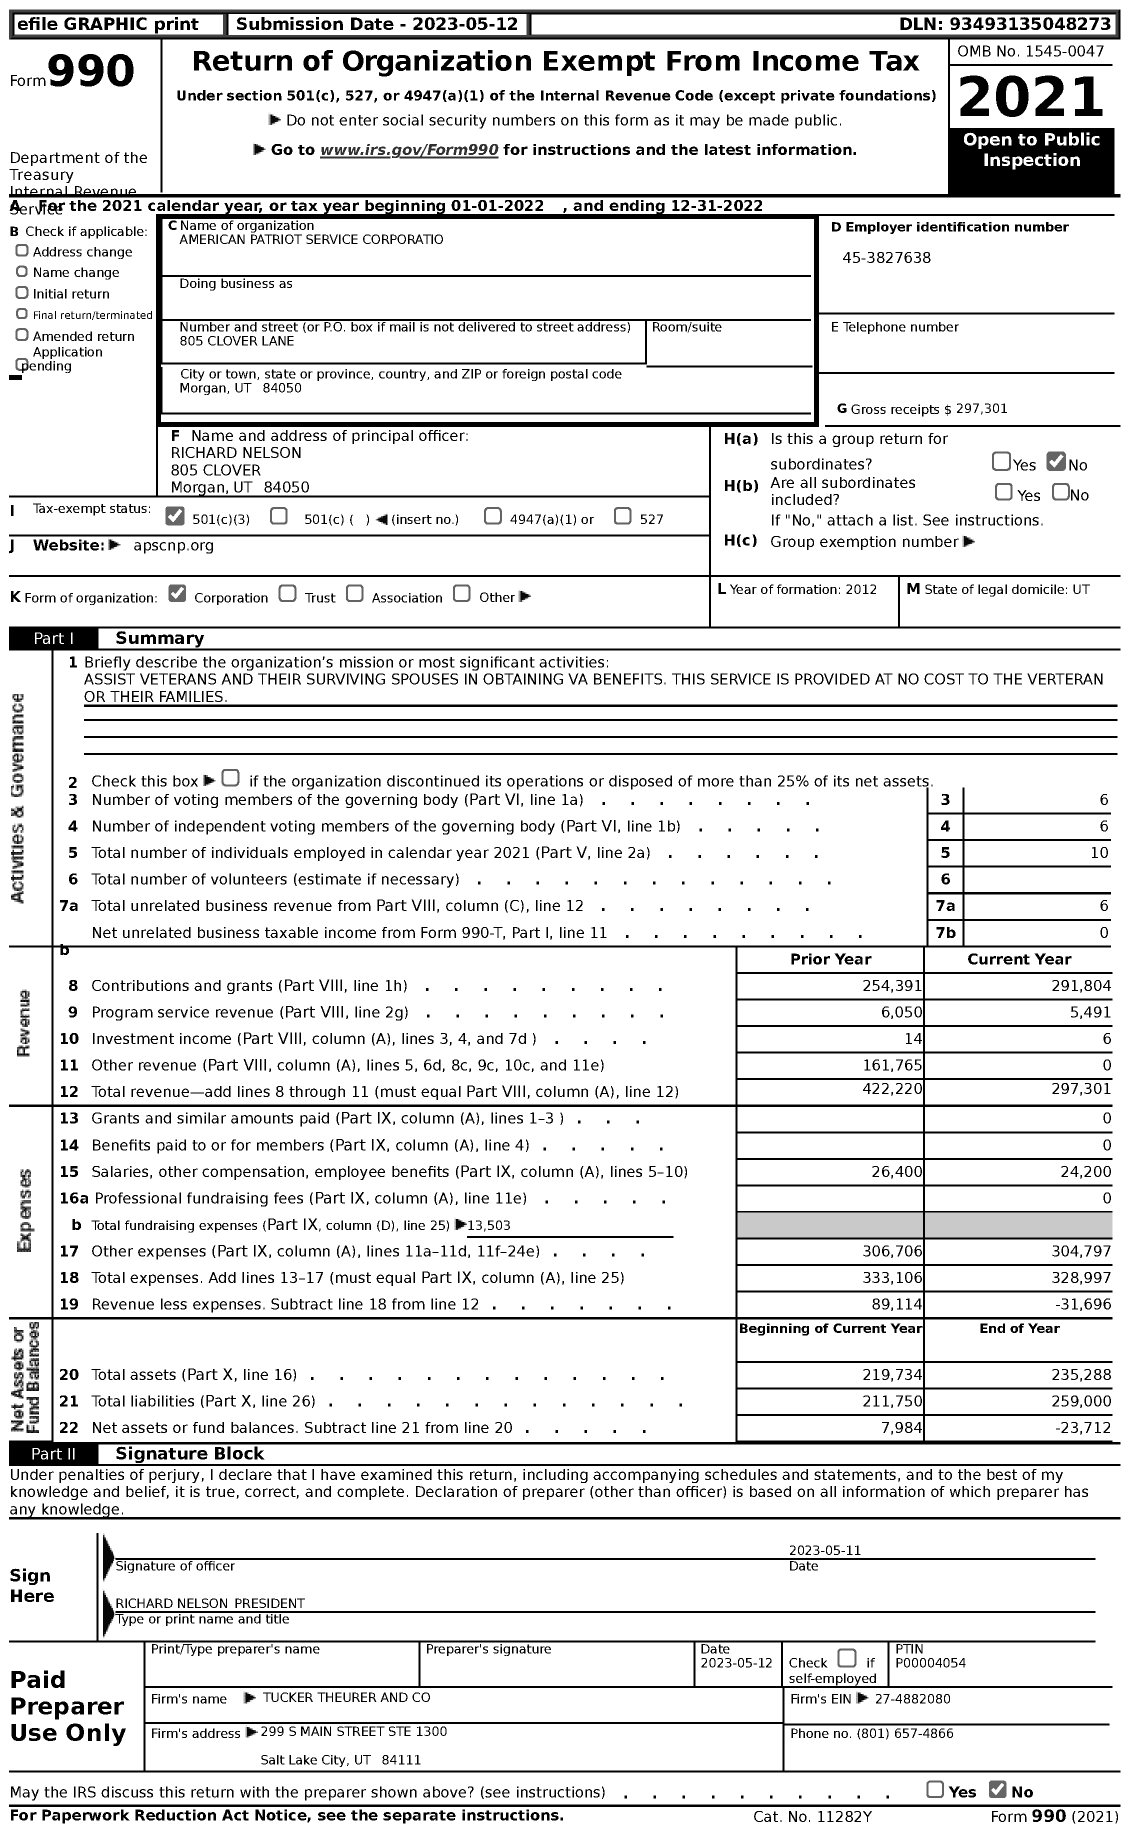 Image of first page of 2022 Form 990 for American Patriot Service Corporation